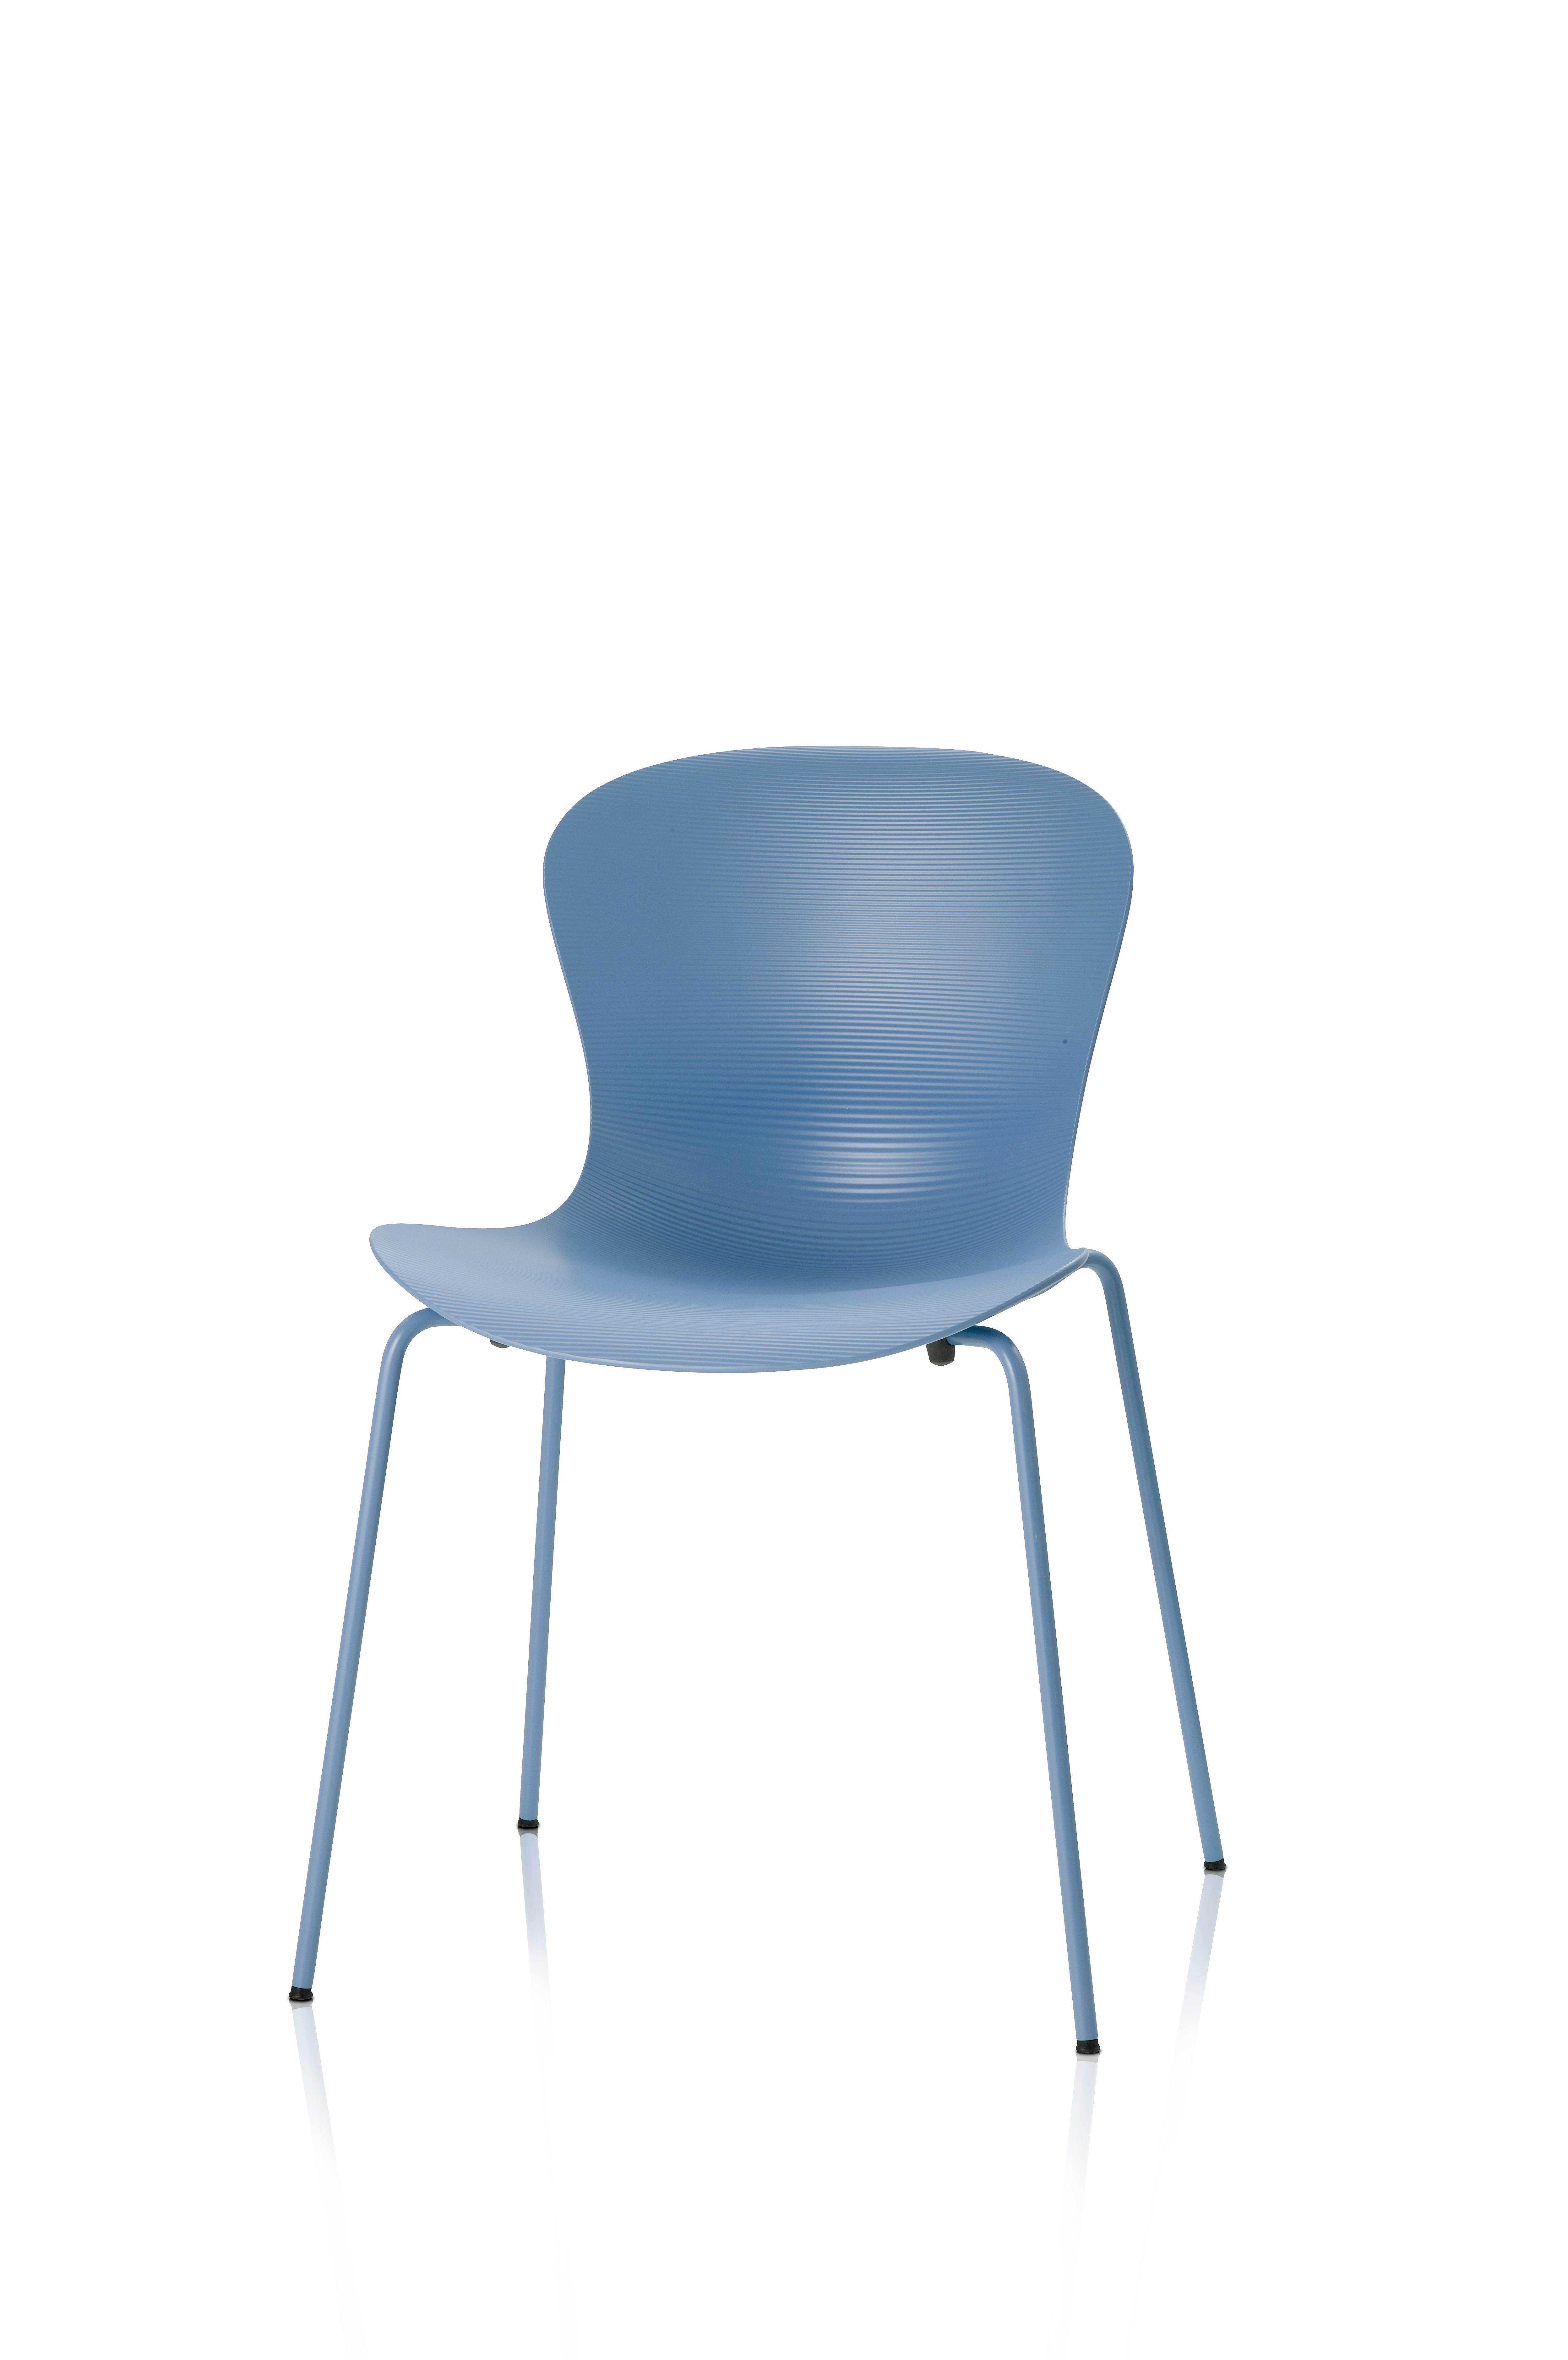 NAP comes in several varieties: stackable with 4 legs or sled and as bar stool or counter stool, all with and without arms. The chair has a high gloss back, and the front of the shell is matt with ripples to emphasize the geometry of the chair. The